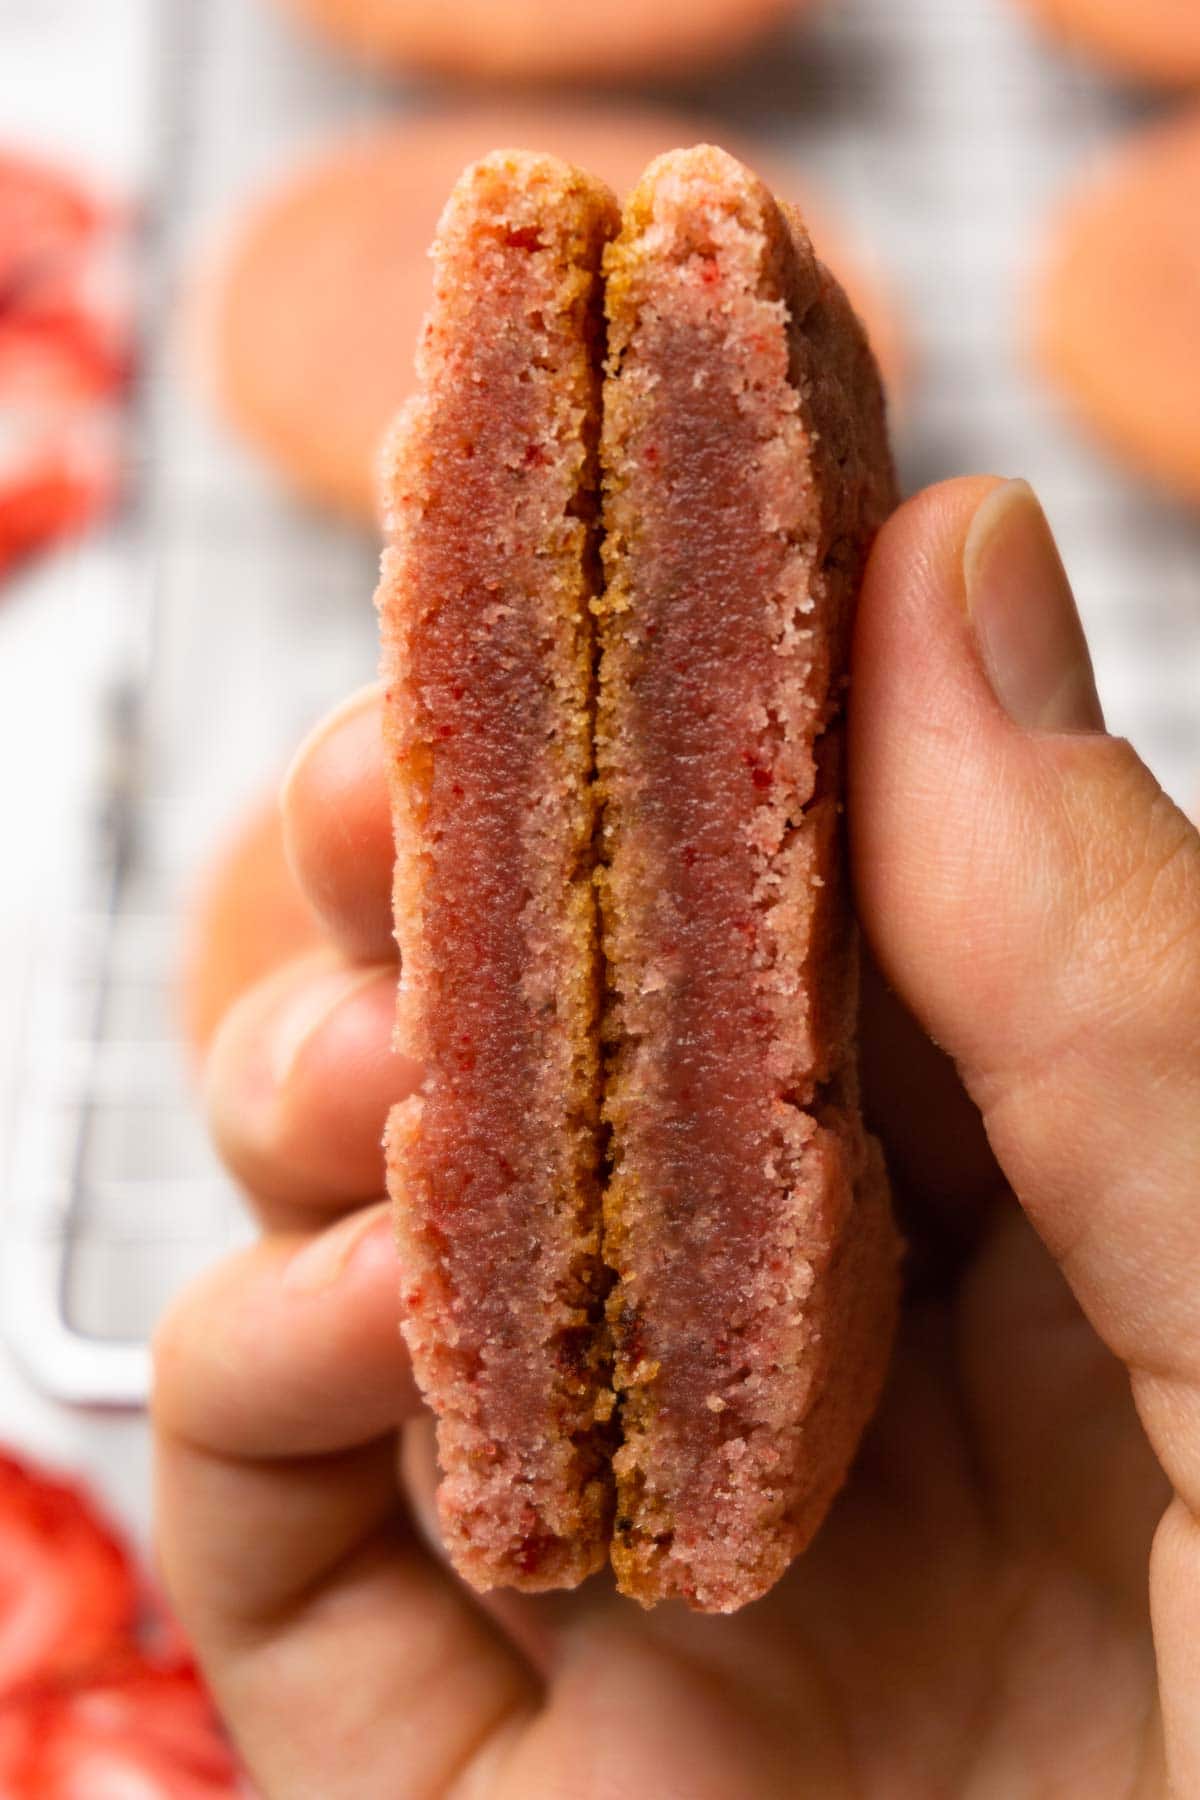 A hand is holding cut in half strawberry cookie.